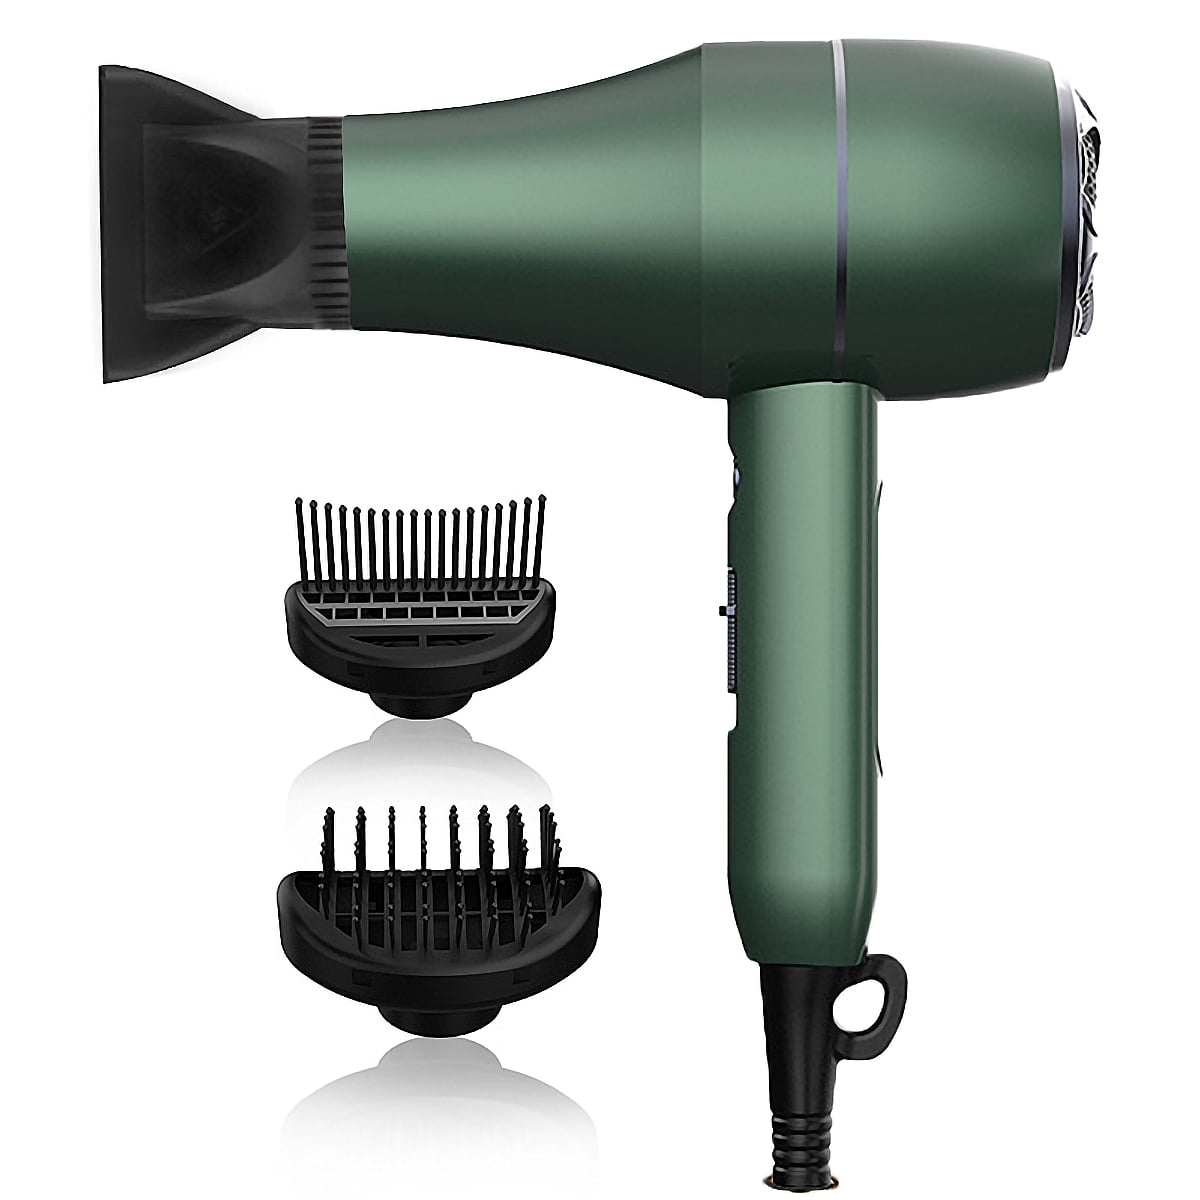 Household Professional Hair Dryer Hot & Cold Wind Air Dryer Hairdressing  Salon Temperature Adjustable Blow Hair Dryers Traving